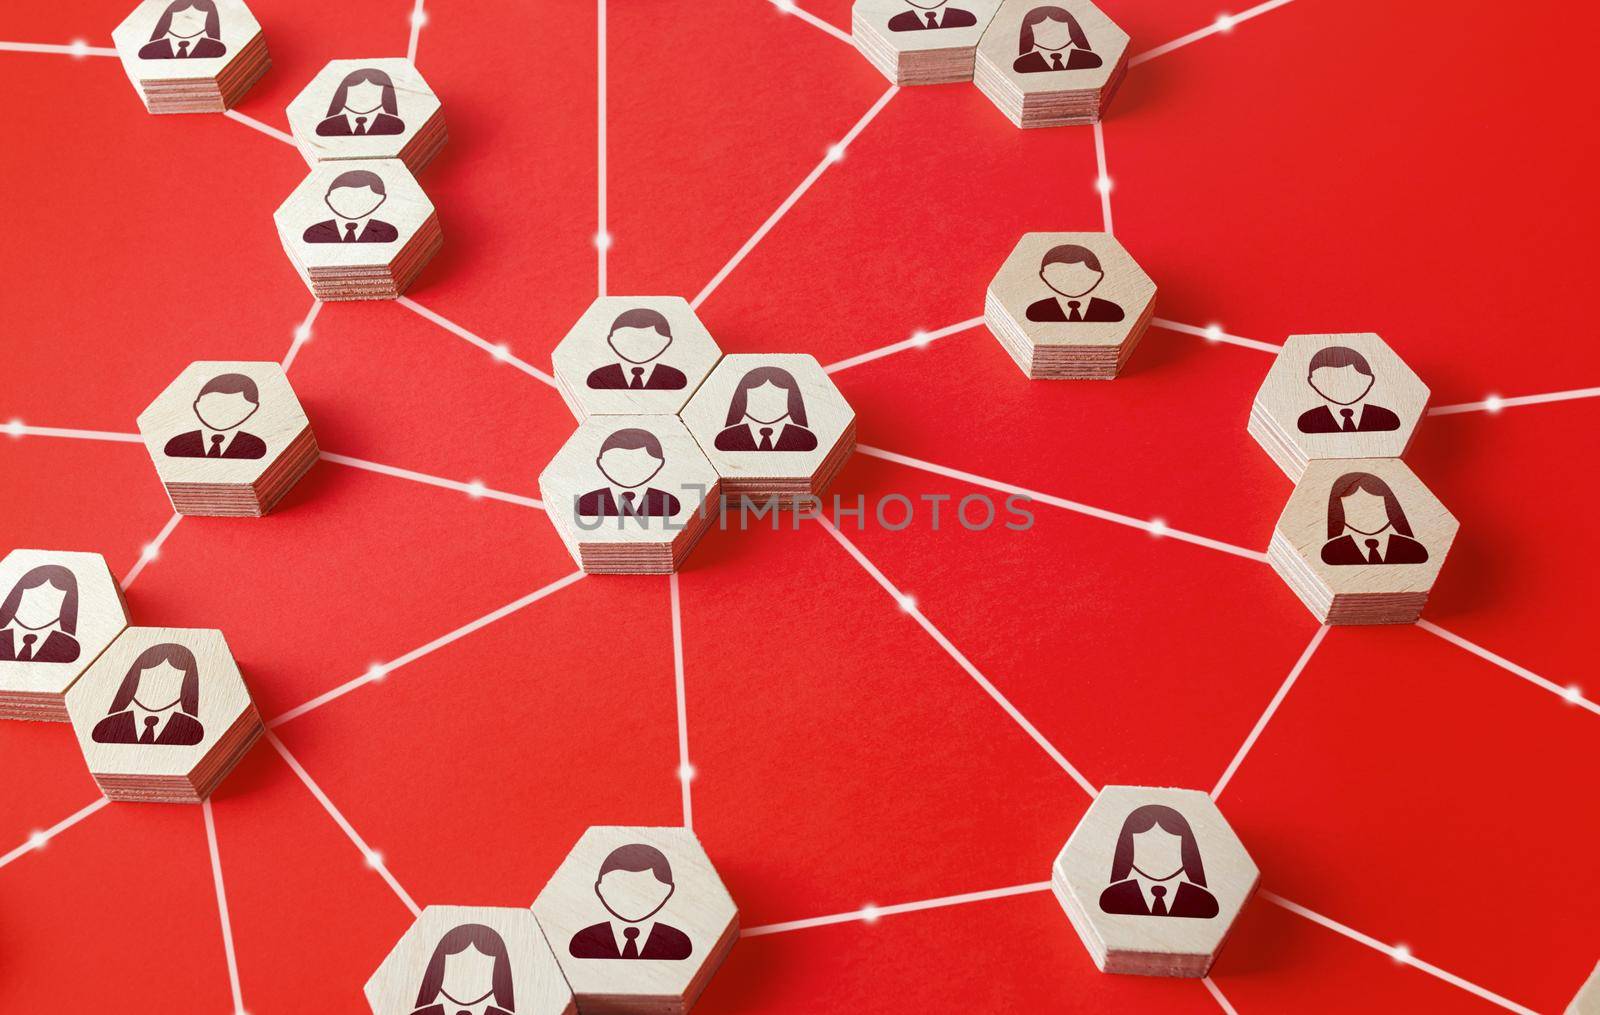 Network of connected people. Communicate interactions between working groups. Company networking communication. Partnerships, business relations development. Decentralized hierarchical system.